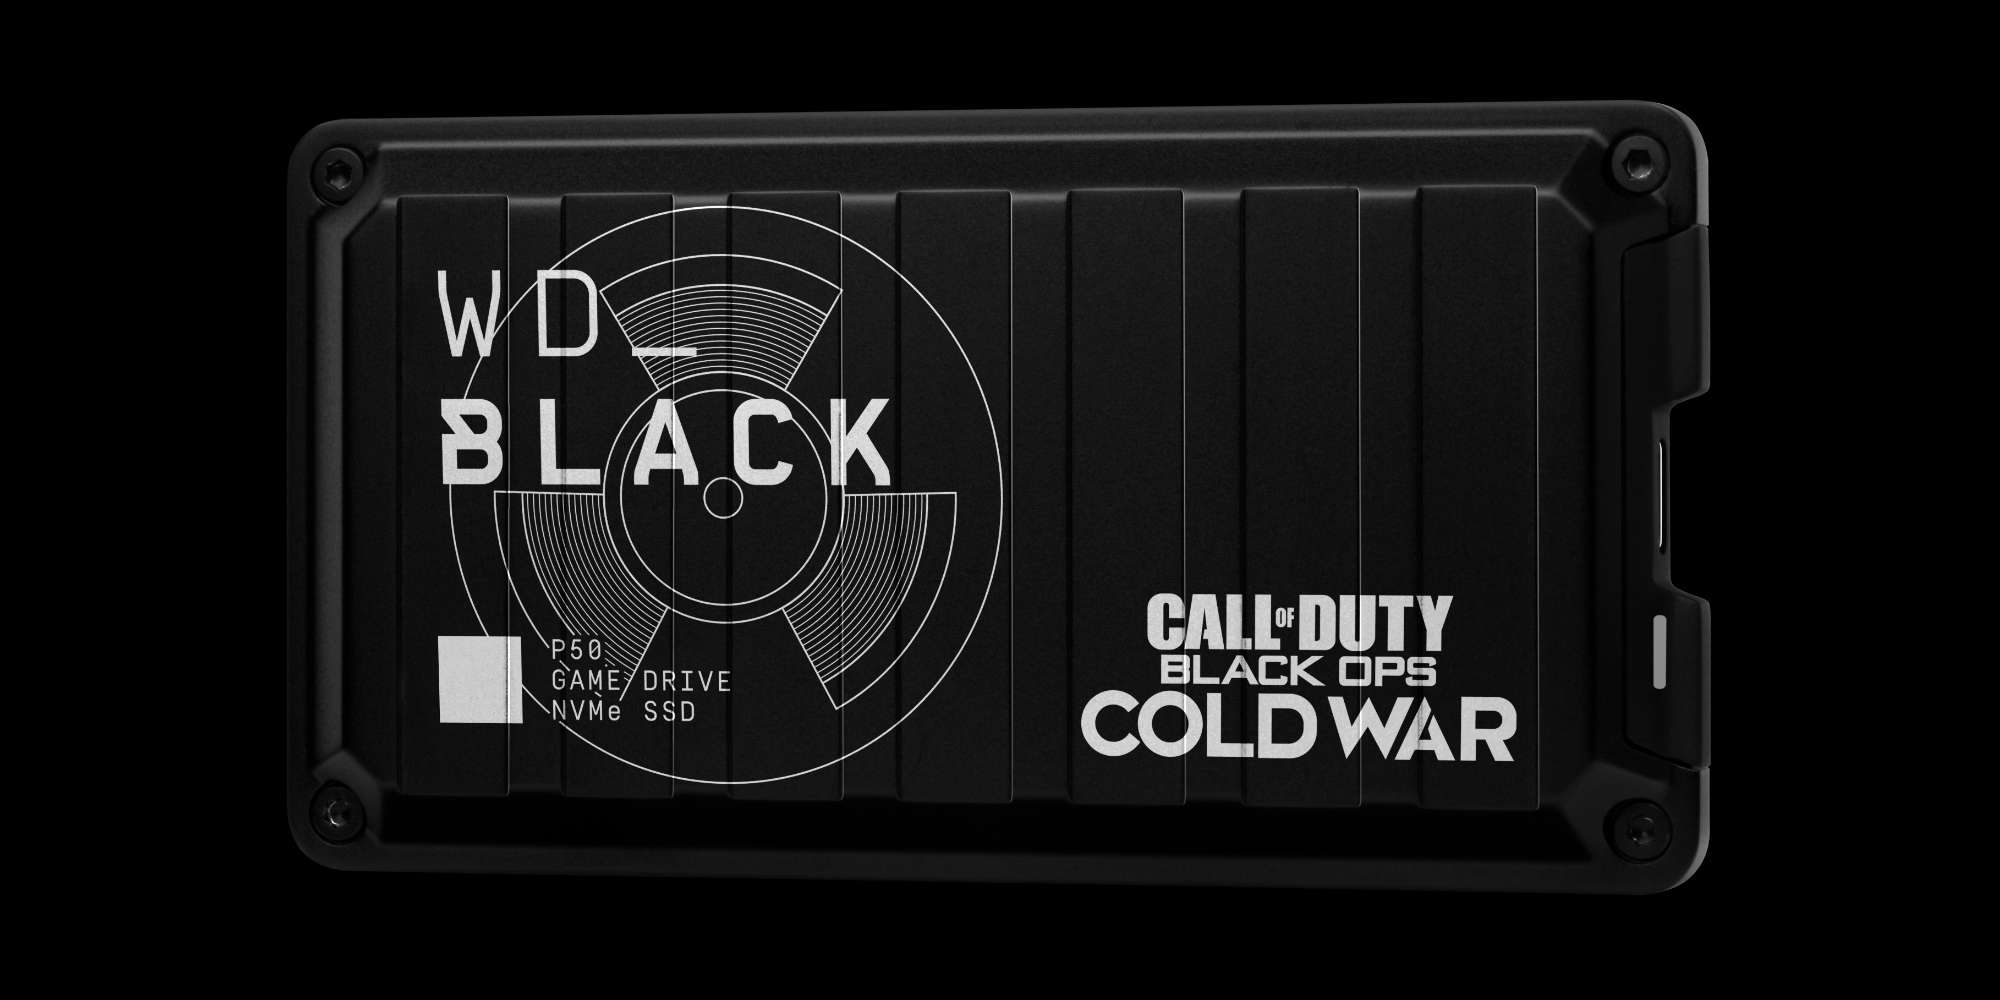 New WD_BLACK Call of Duty storage drives land in three styles